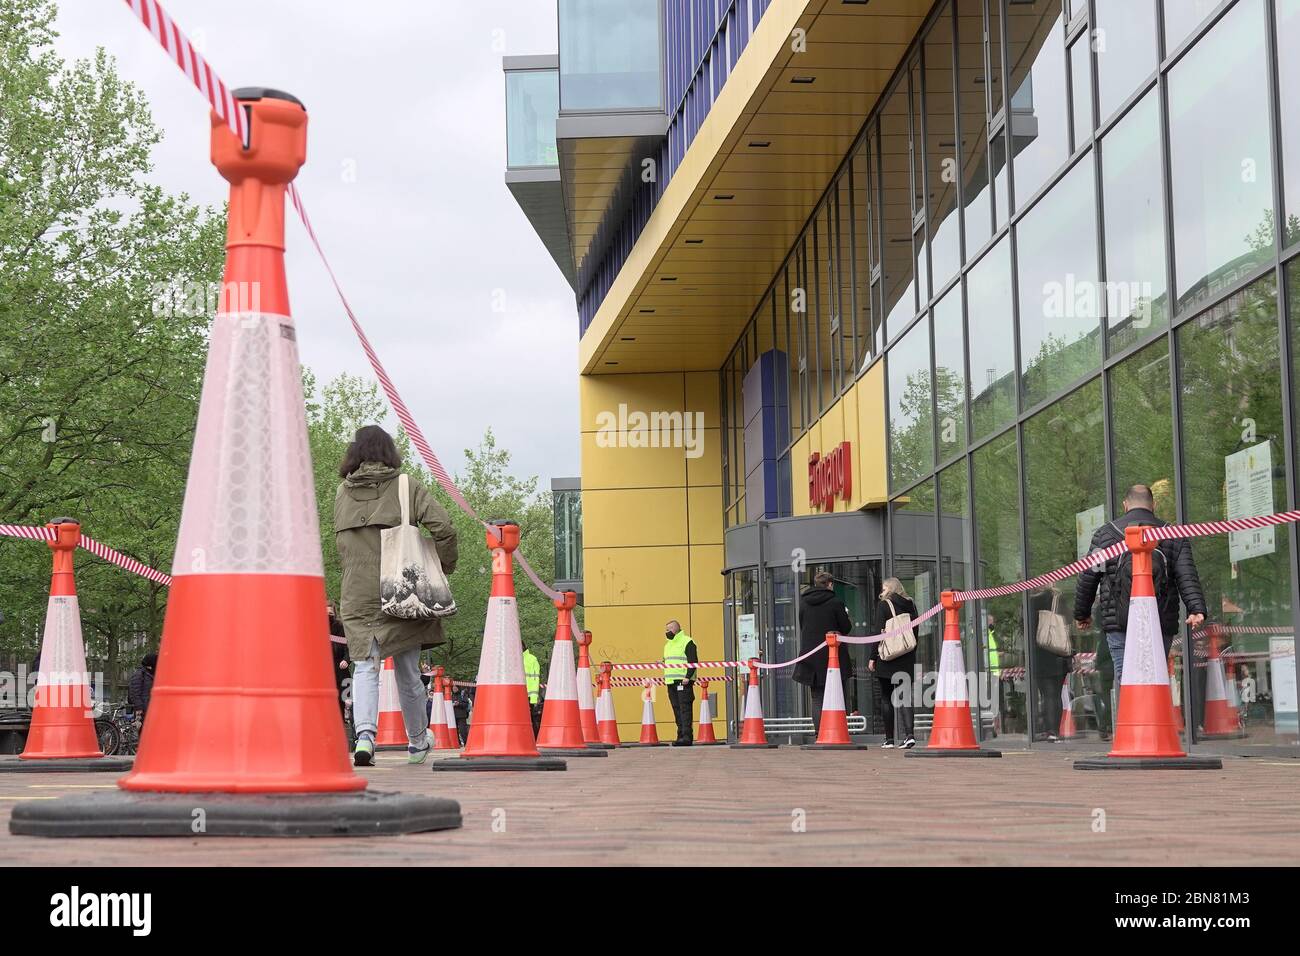 Hamburg, Germany. 13th May, 2020. Customers walk behind red and white barriers to the Ikea branch in Altona. The furniture store in Hamburg-Altona is reopened today after closing due to the corona epidemic. Distance regulations and a comprehensive safety and hygiene concept apply. Credit: Bodo Marks/dpa/Alamy Live News Stock Photo